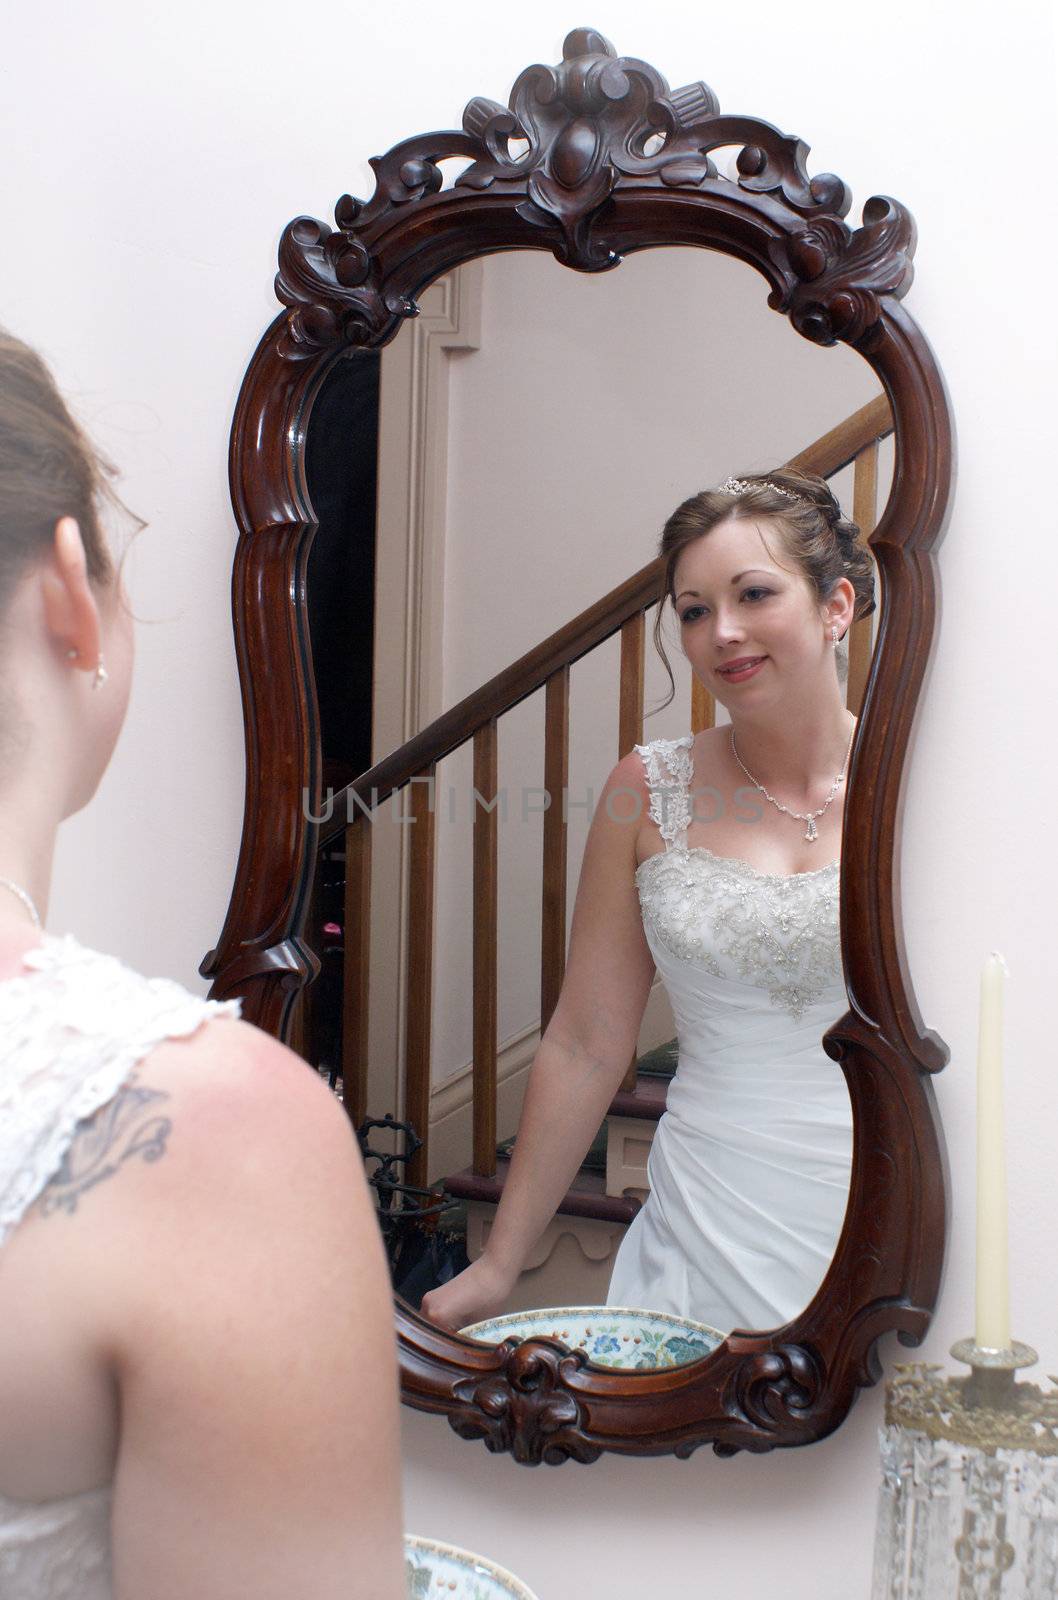 A newly married bride is admiring herself in the mirror on her wedding day.